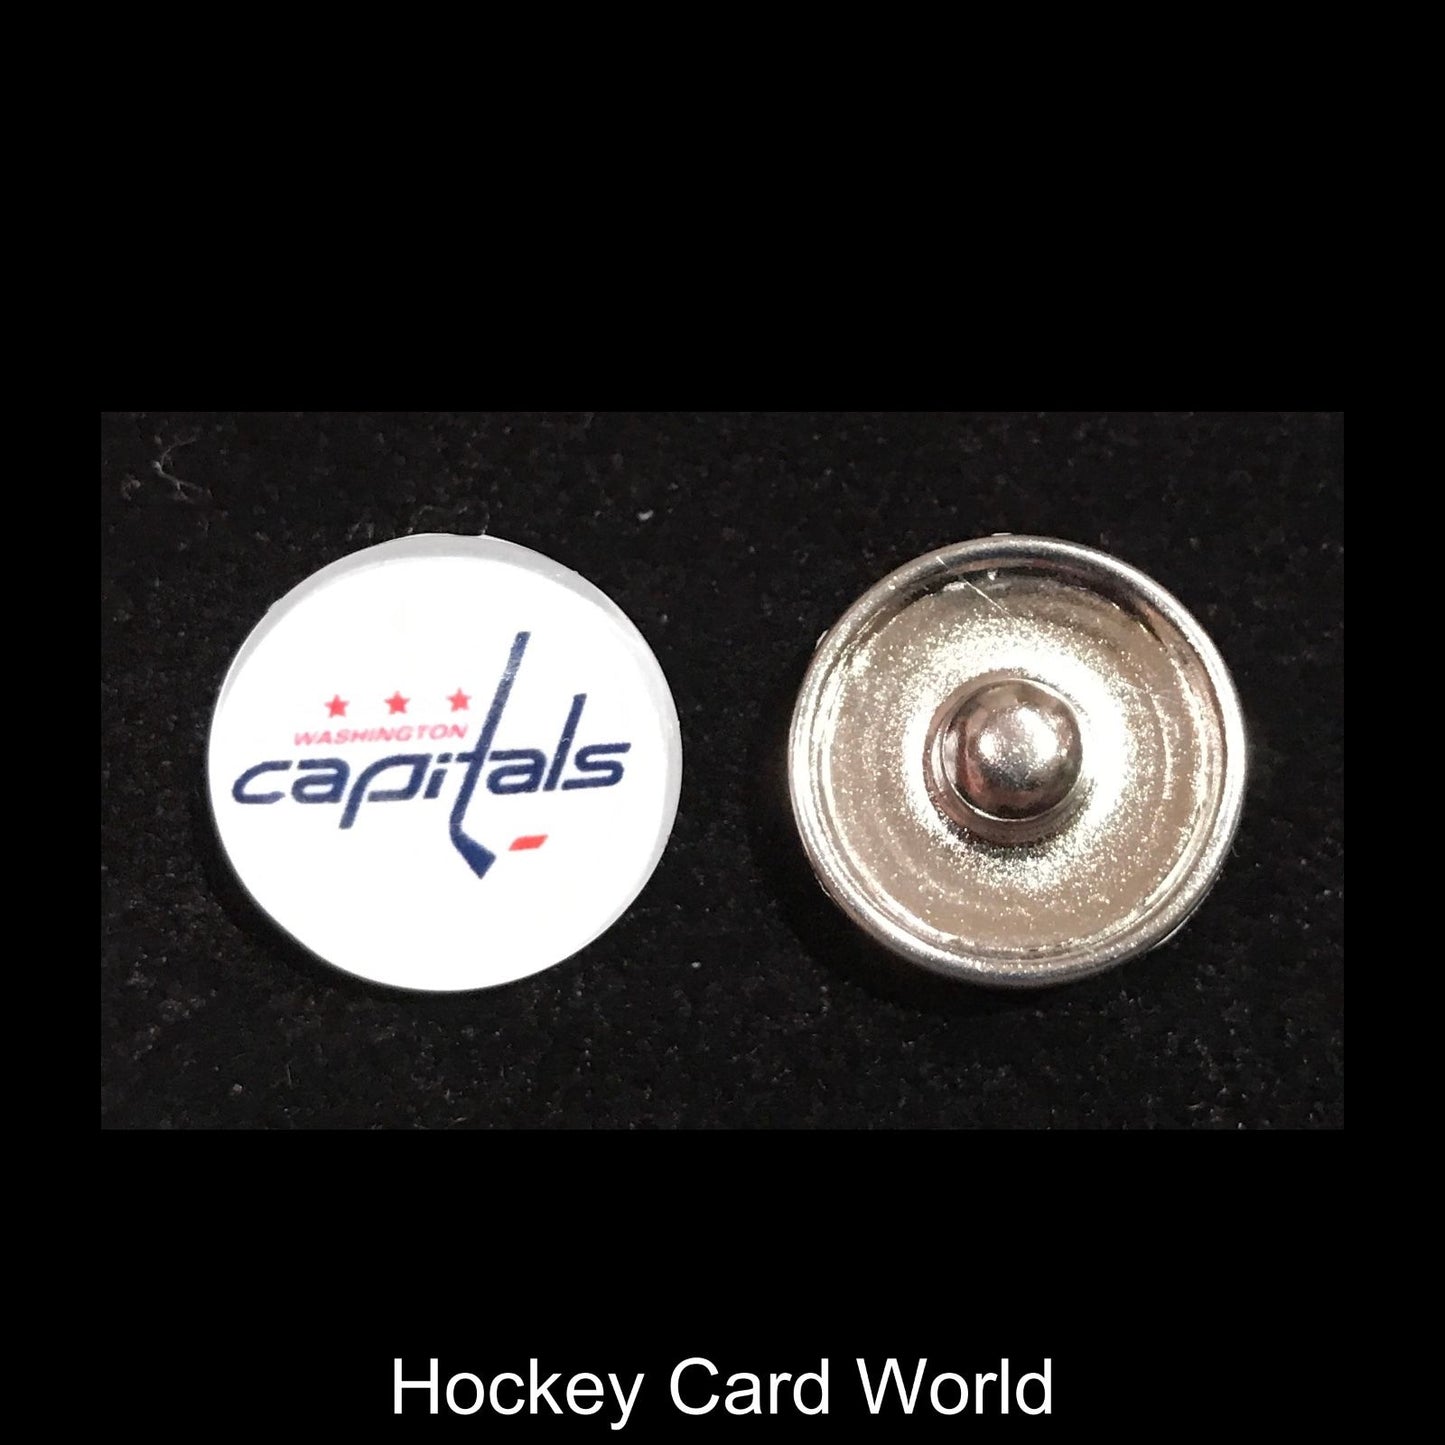  Washington Capitals NHL Snap Ginger Button Jewelry for Jackets, Bracelets. Image 1